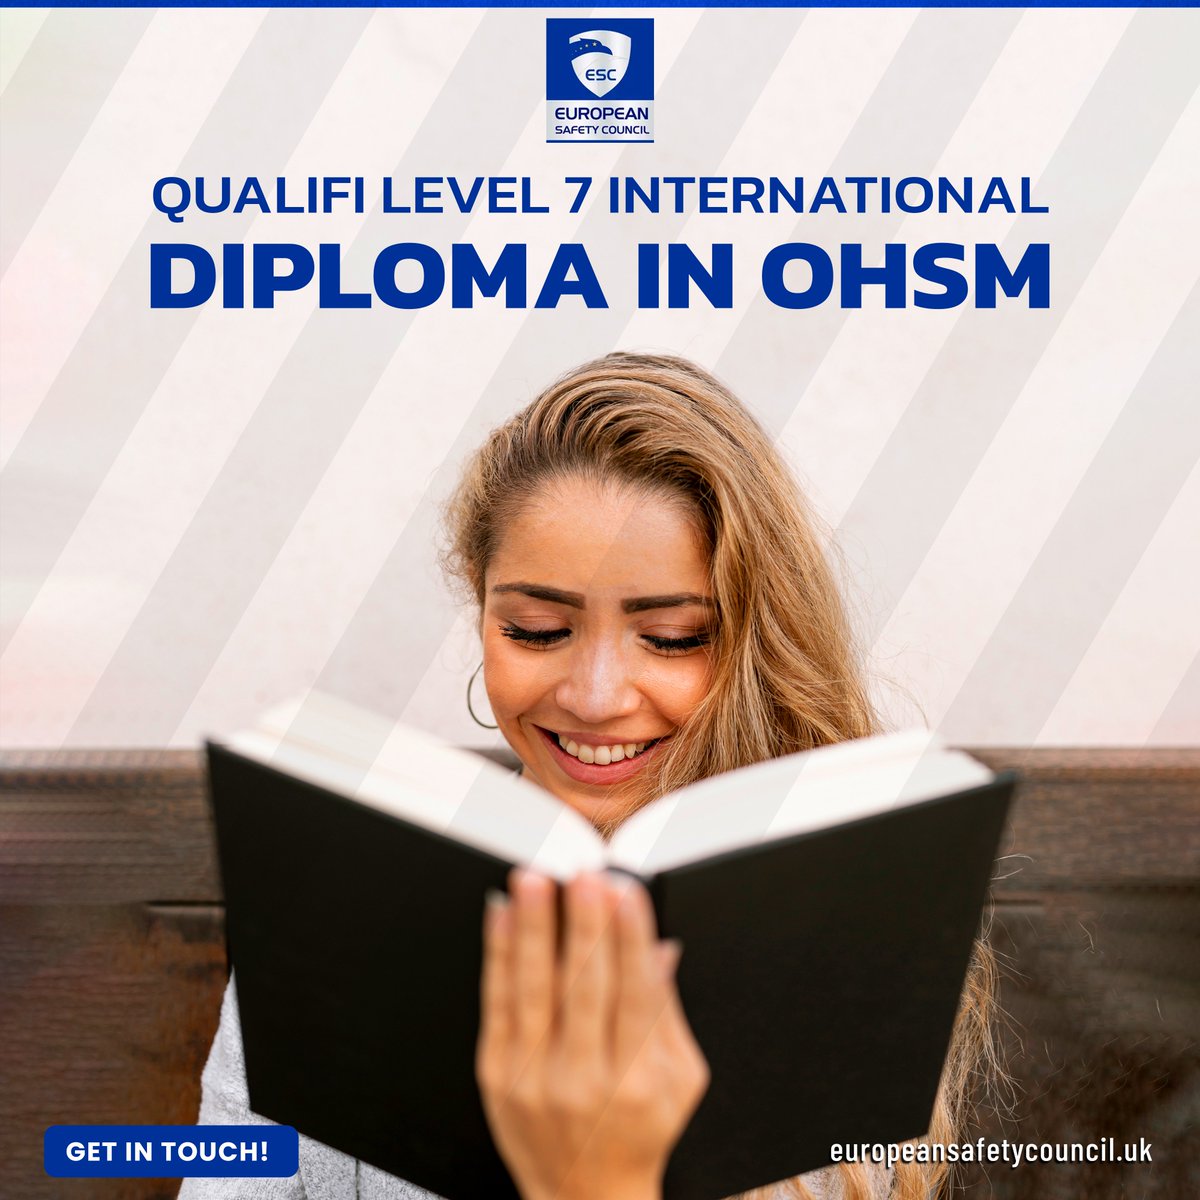 Advance your career with Qualifi's Level 7 International Diploma in Occupational
Health and Safety Management!
Enroll now!
#OHSM #QualifyDiploma #CareerGrowth #HealthAndSafety #GlobalOpportunities
#ProfessionalDevelopment #OccupationalSafety #ProfessionalAdvancement